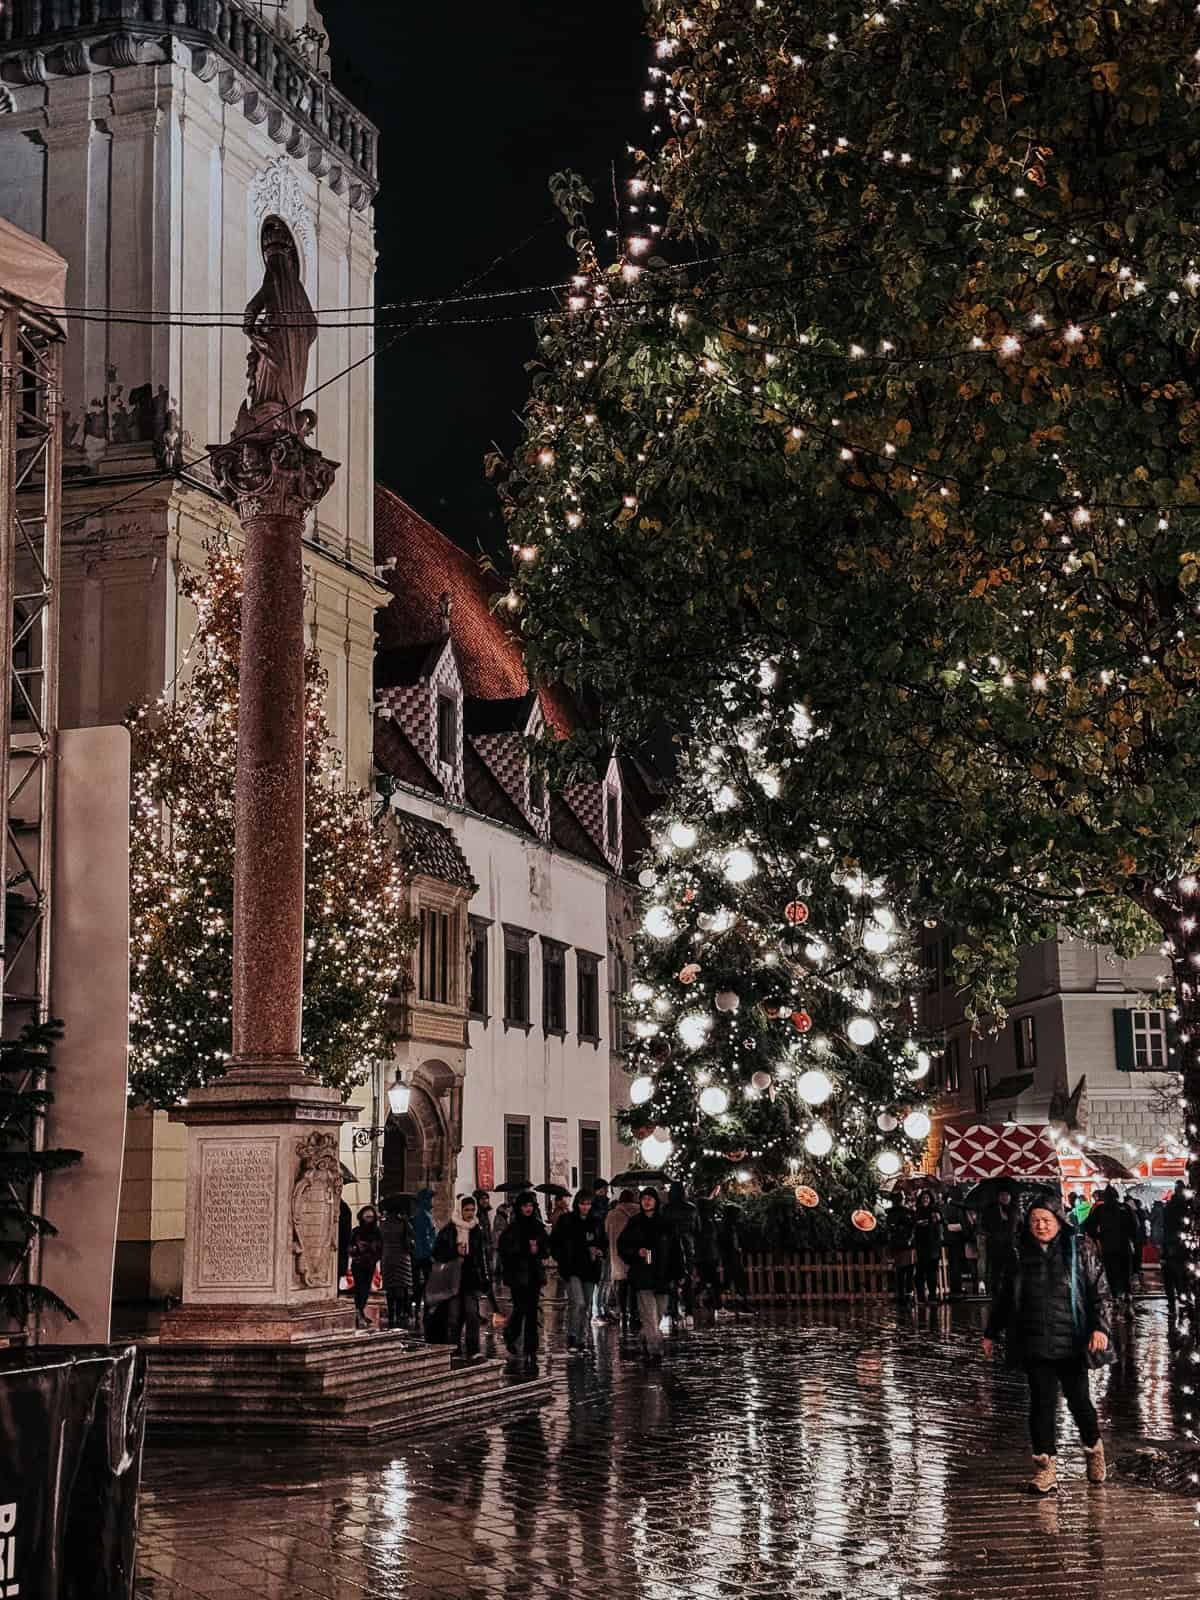 A picturesque night scene in a square with a historical statue, a large Christmas tree, and a crowd of visitors under twinkling lights and a wet pavement reflecting the festive atmosphere.